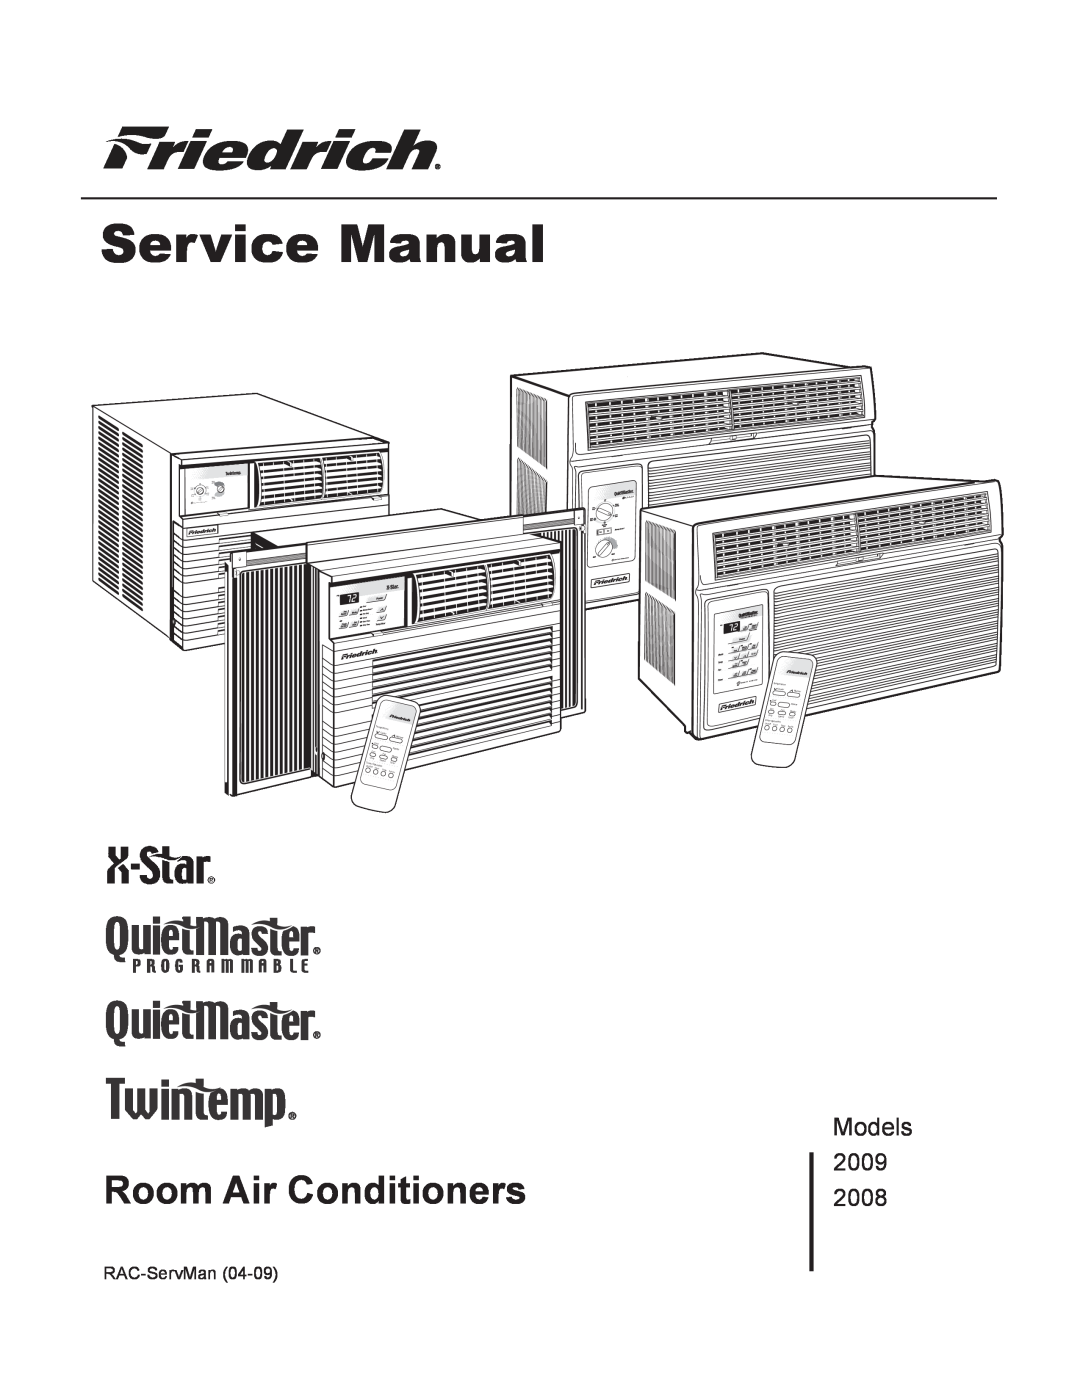 Friedrich 2009, 2008 service manual Models, Room Air Conditioners, Cooler, Warmer, Power, Money, Only, Speed, Timer, Stop 